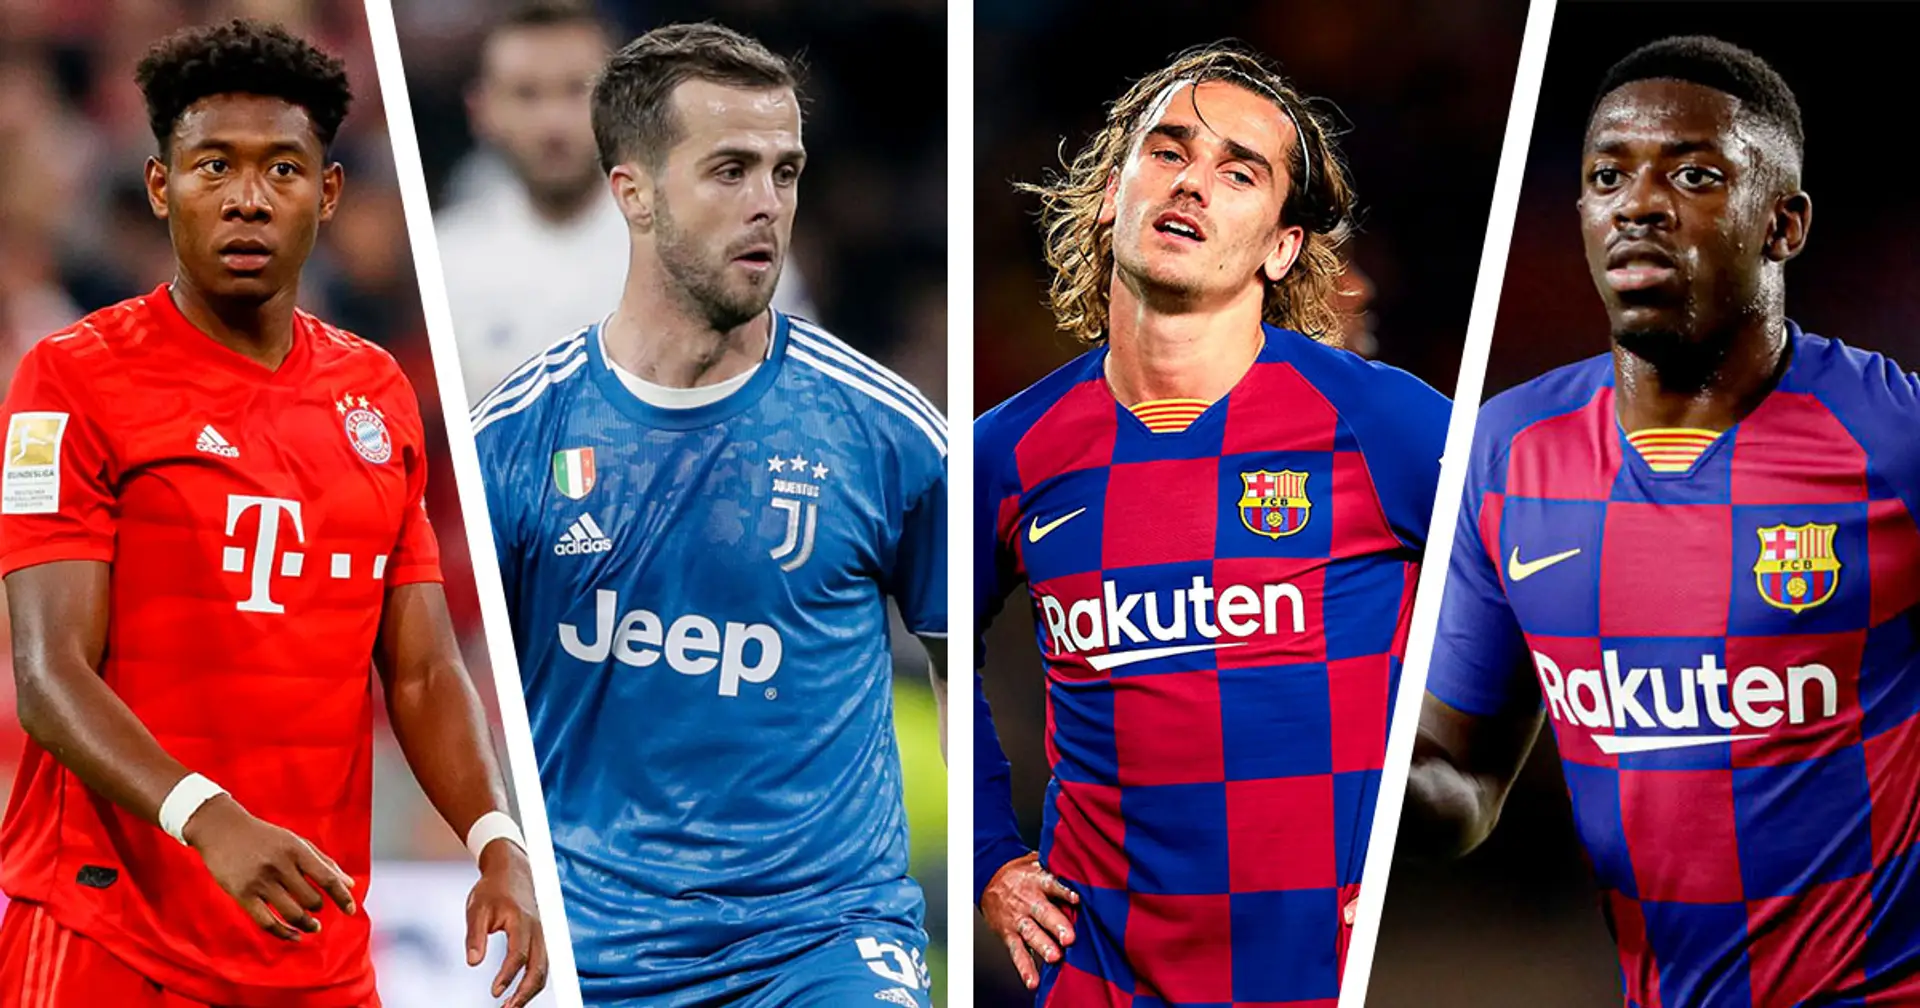 No Lautaro, Pjanic as starter: How Barca's 2020/21 squad would look like based on latest transfer rumours